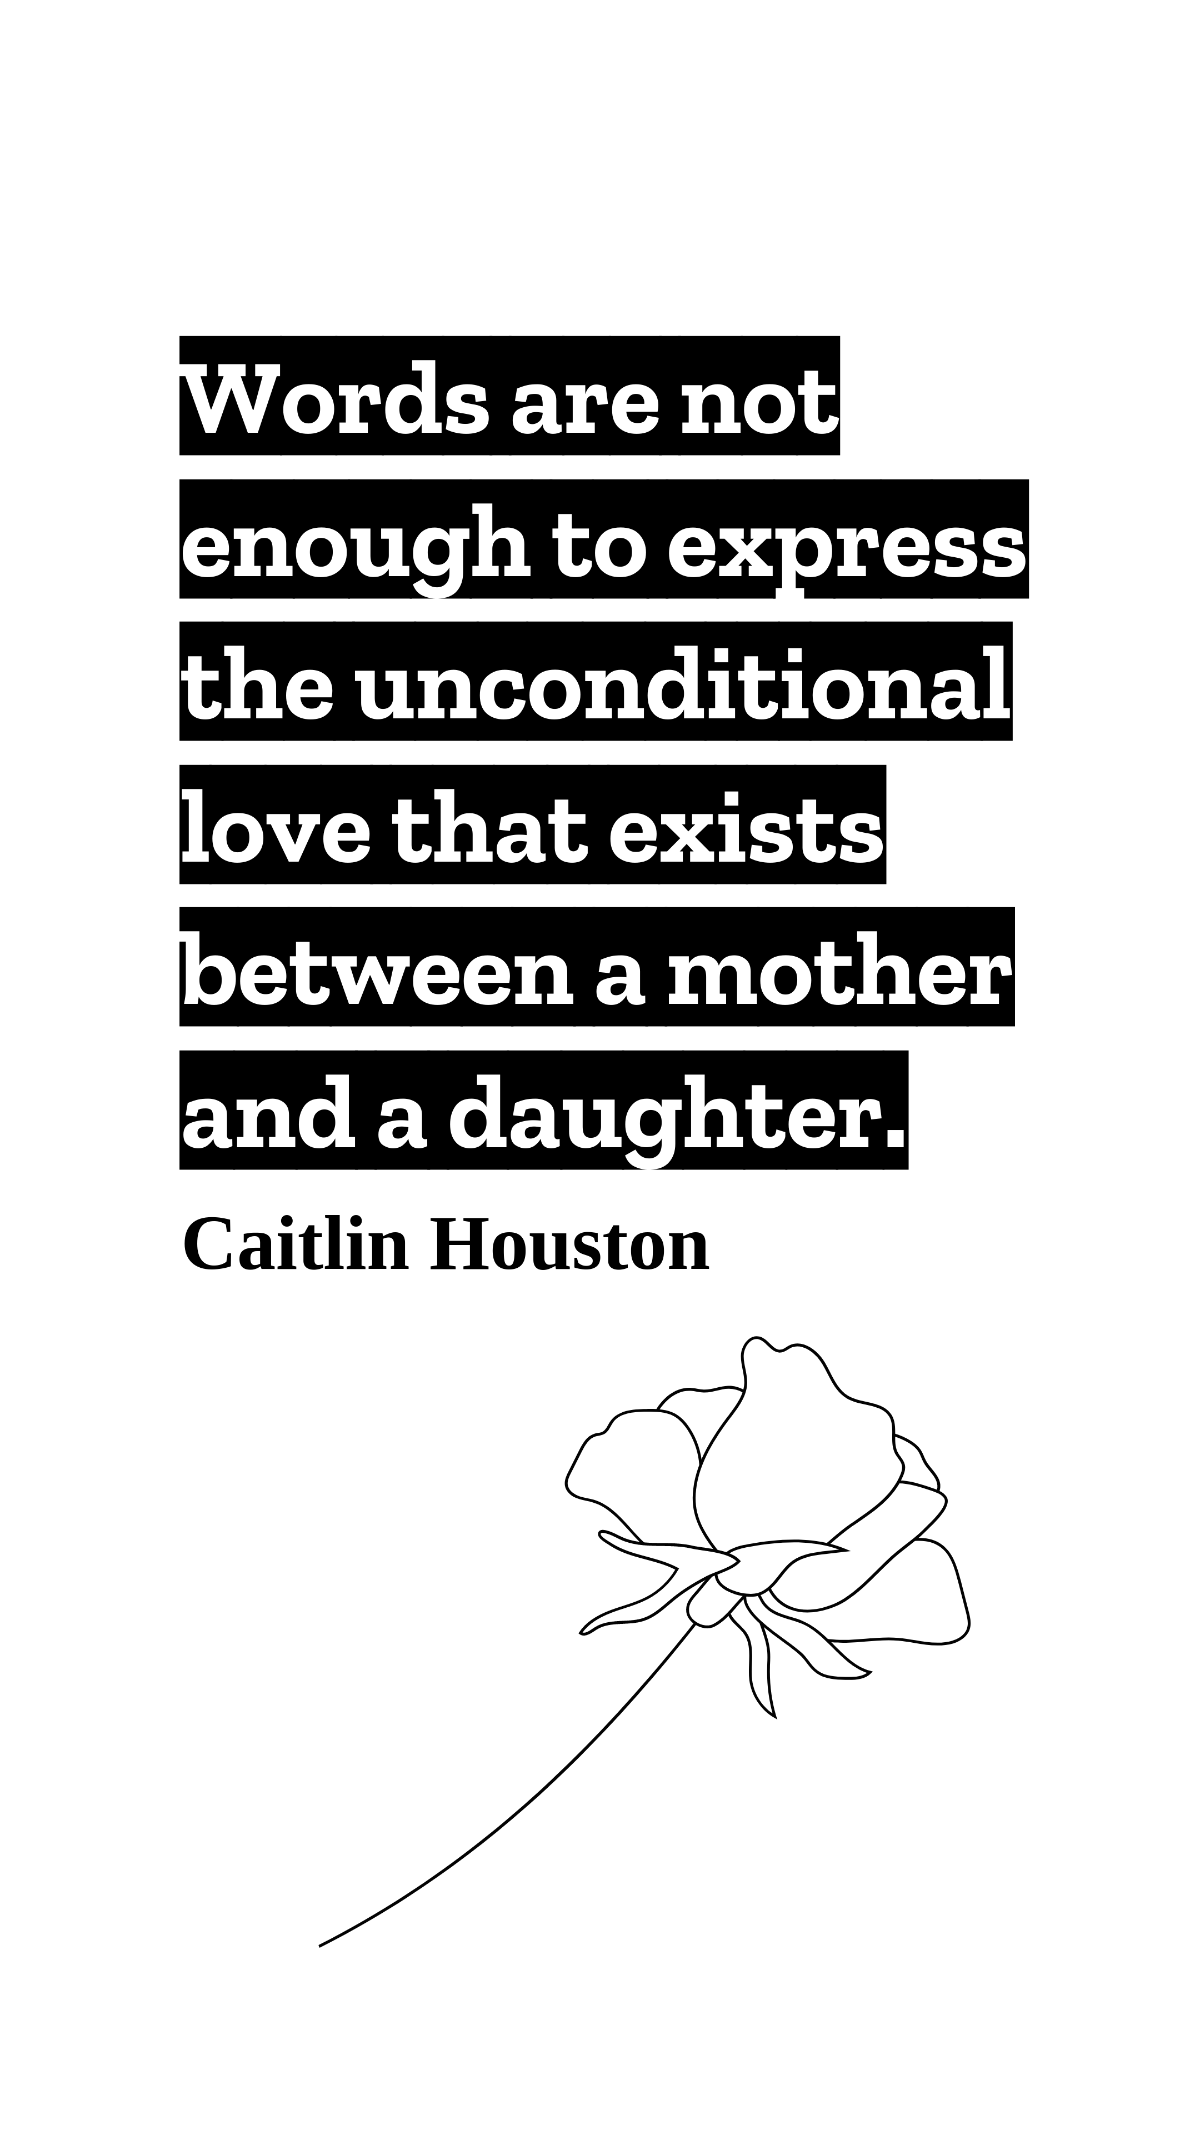 Caitlin Houston - Words are not enough to express the unconditional love that exists between a mother and a daughter. Template